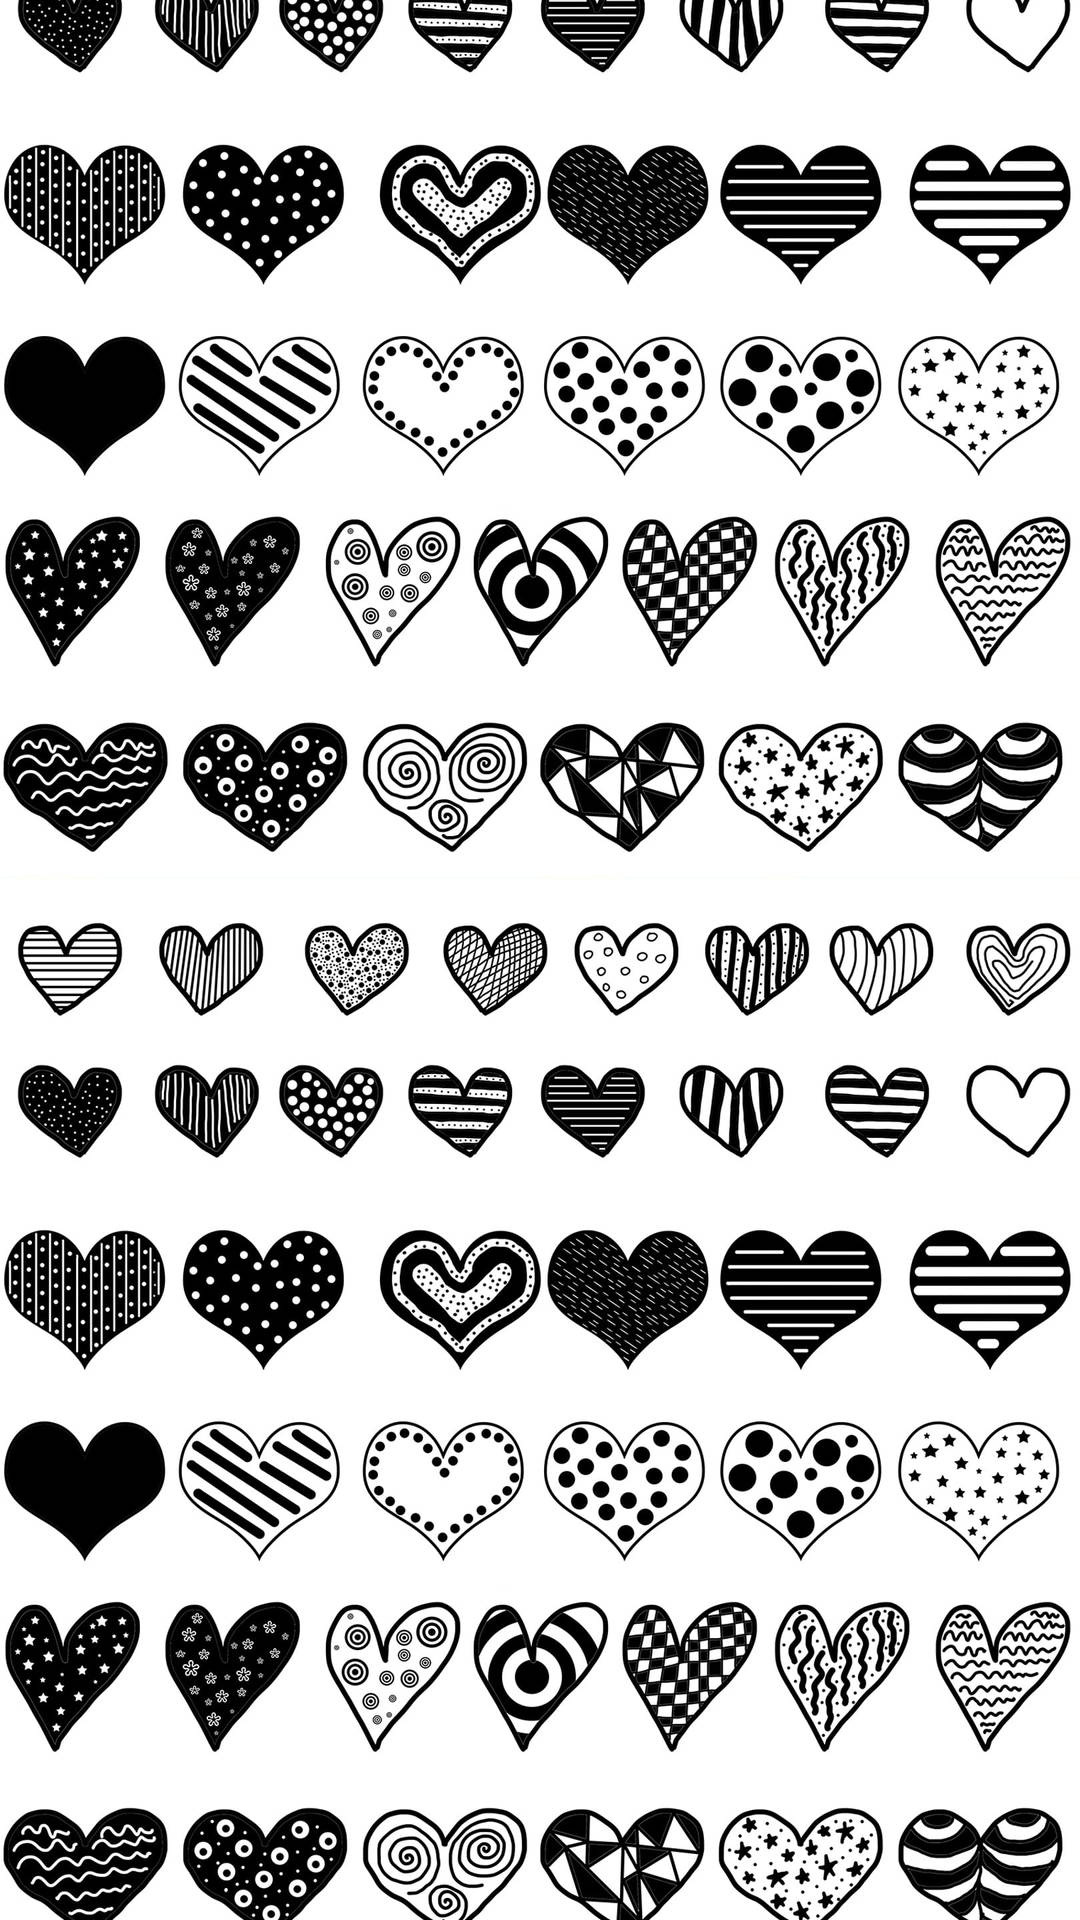 Free Black And White Heart Wallpaper Downloads, Black And White Heart Wallpaper for FREE